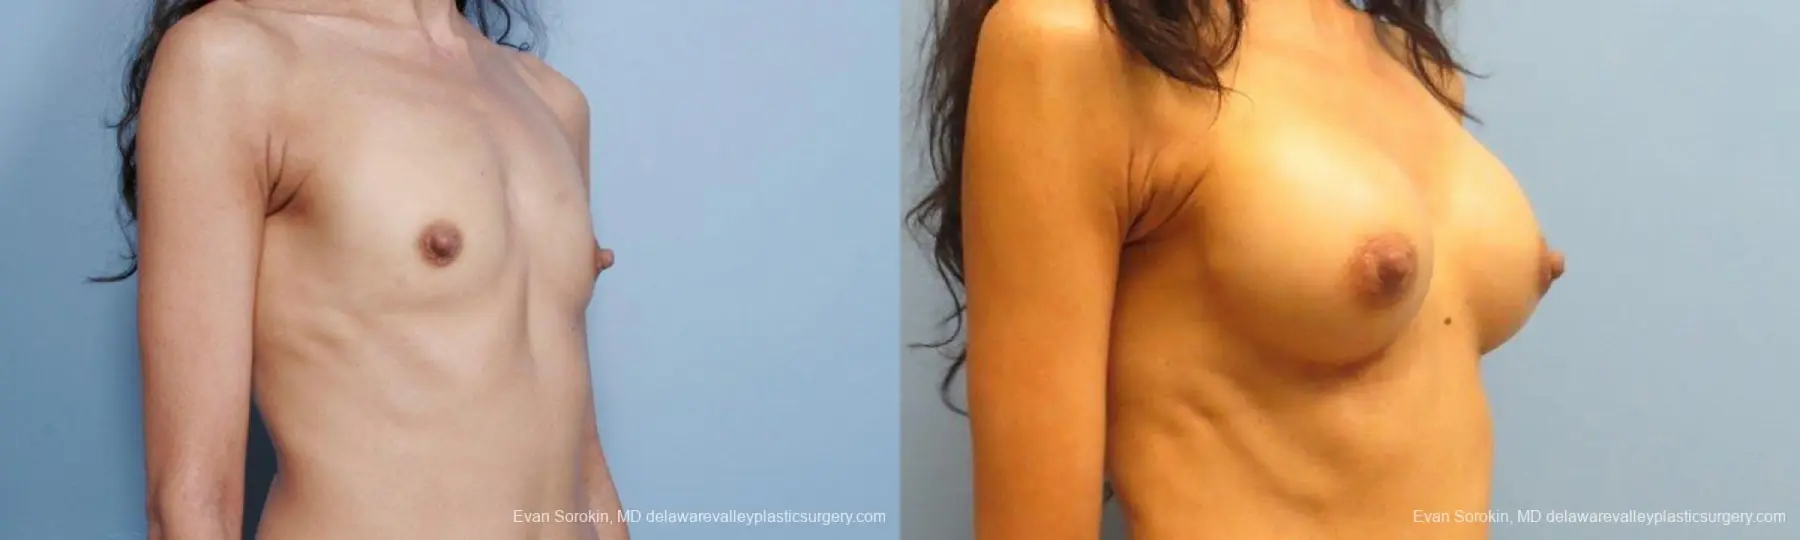 Philadelphia Breast Augmentation 9424 - Before and After 2